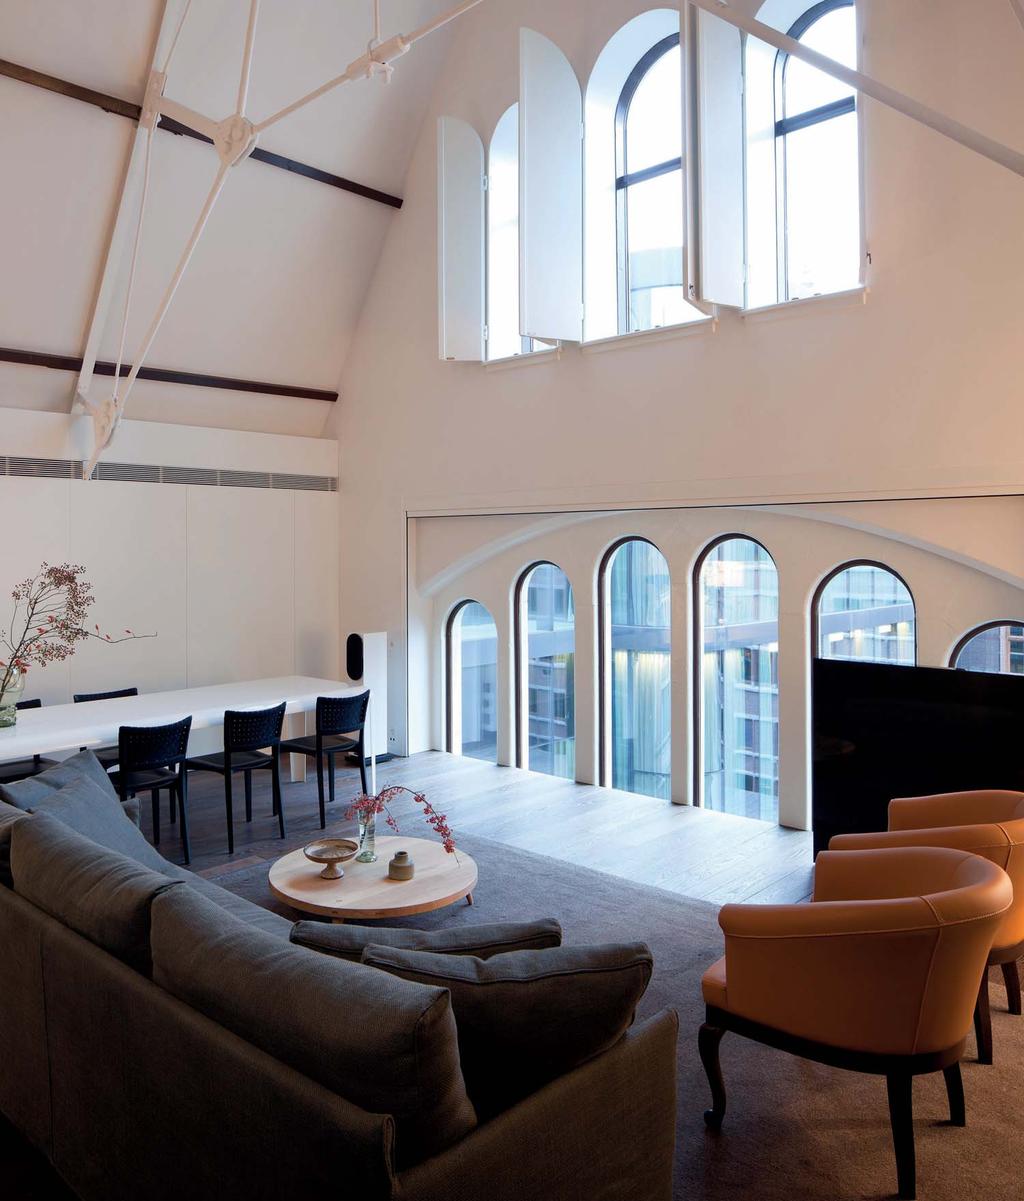 Concerto Suite signature suites The Concerto Suite is lit by sets of extraordinary historic windows, arranged like the pipes of an organ, which are visible on the neo-gothic façade of the